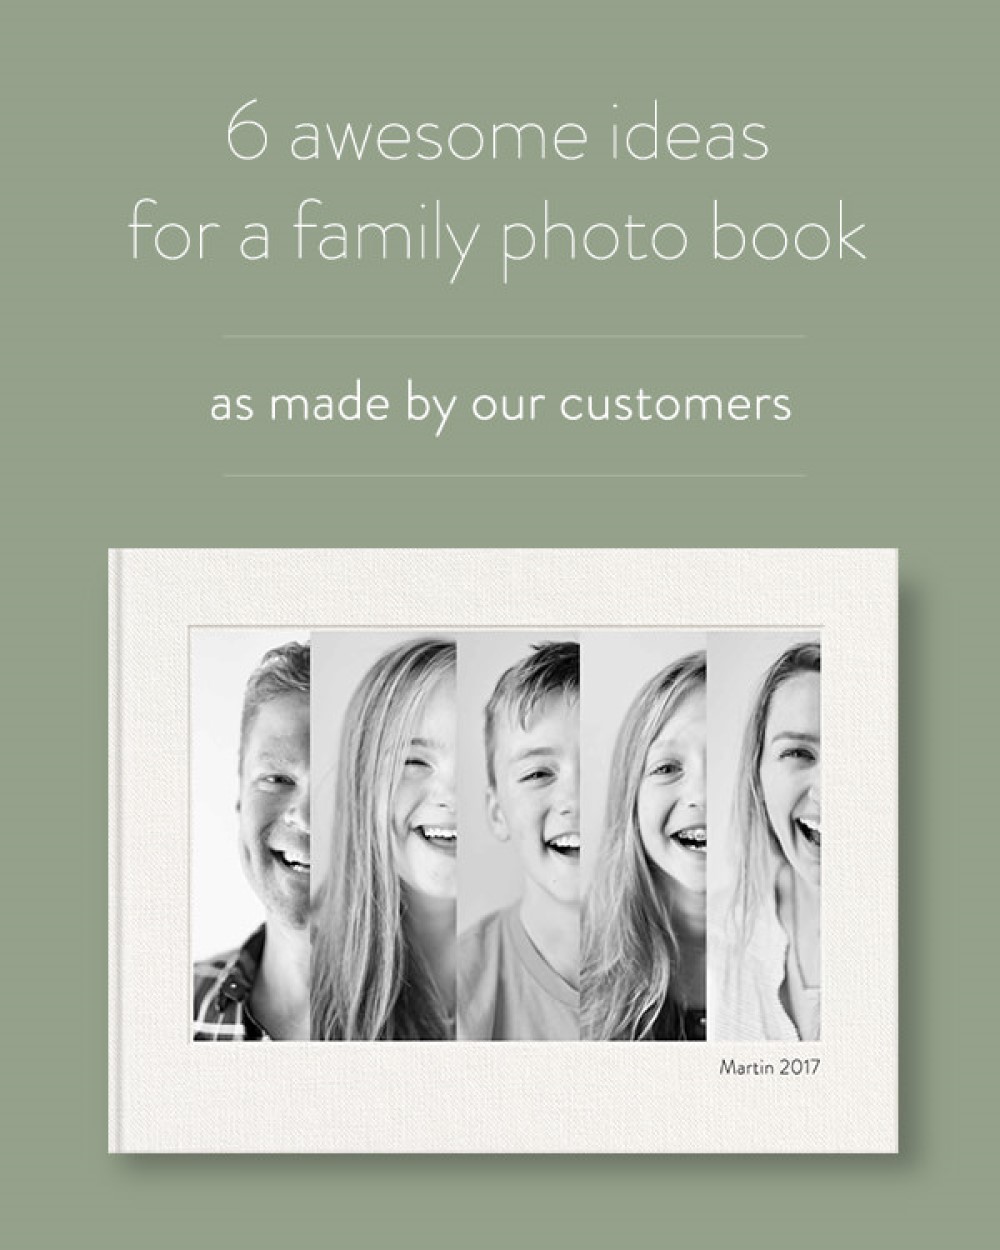 6 awesome ideas for a family photo book as made by our customers with a family photo book.